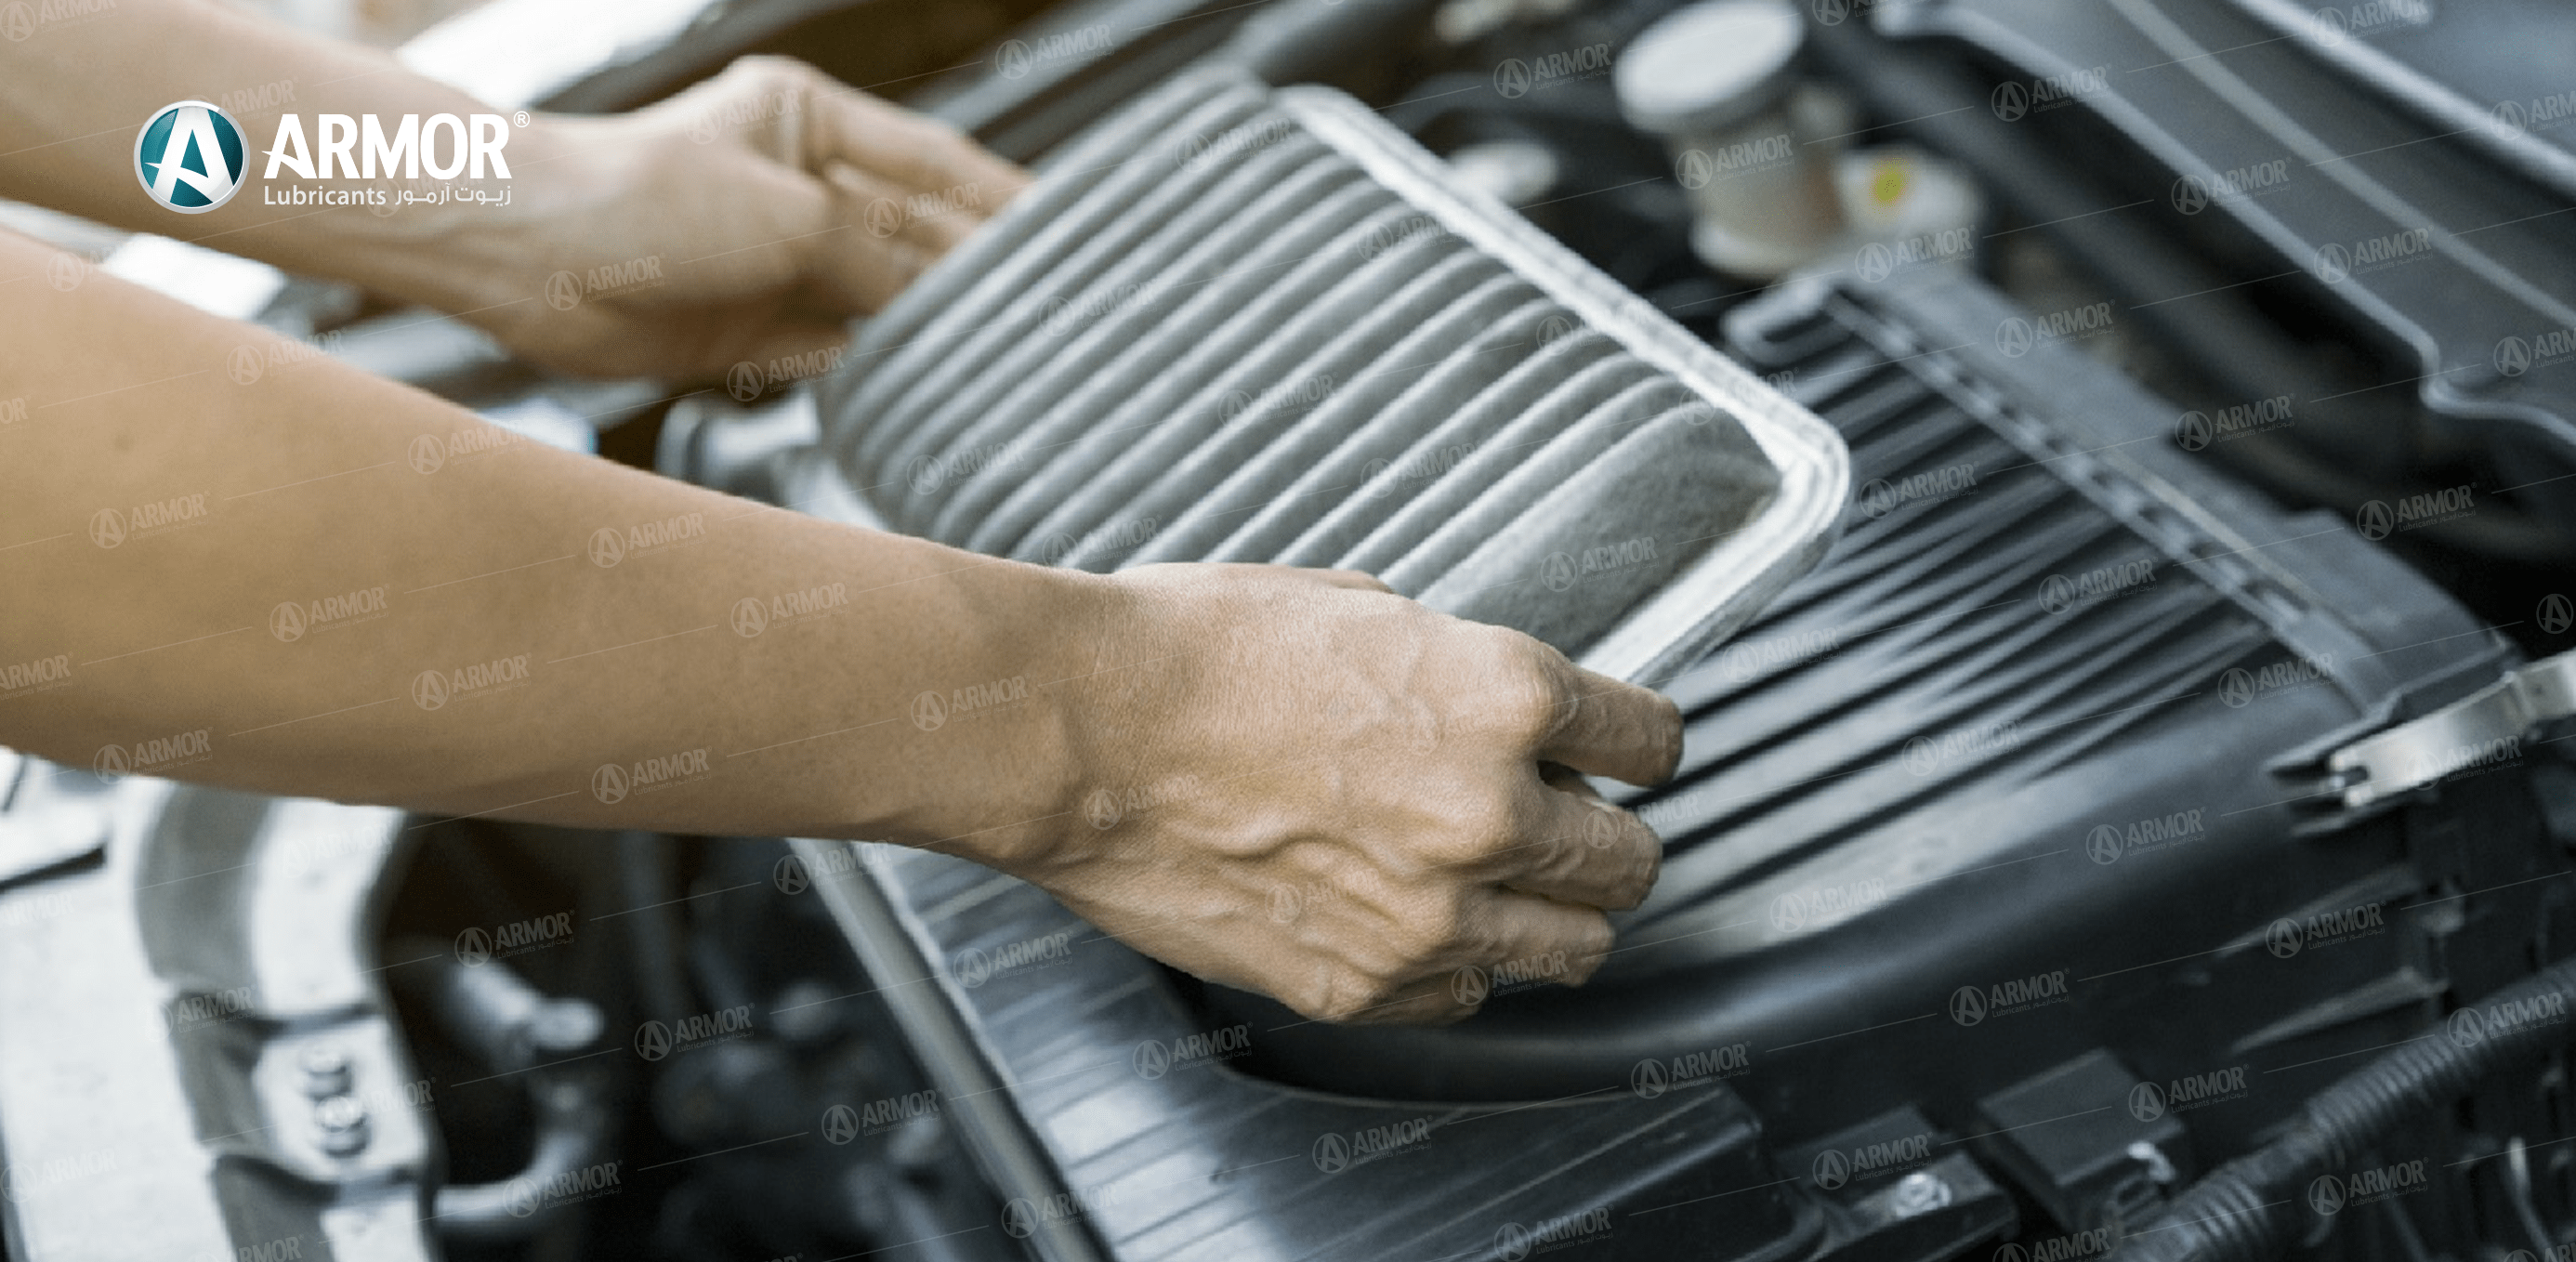 Change Air Filter in Passenger Cars to trap dirt